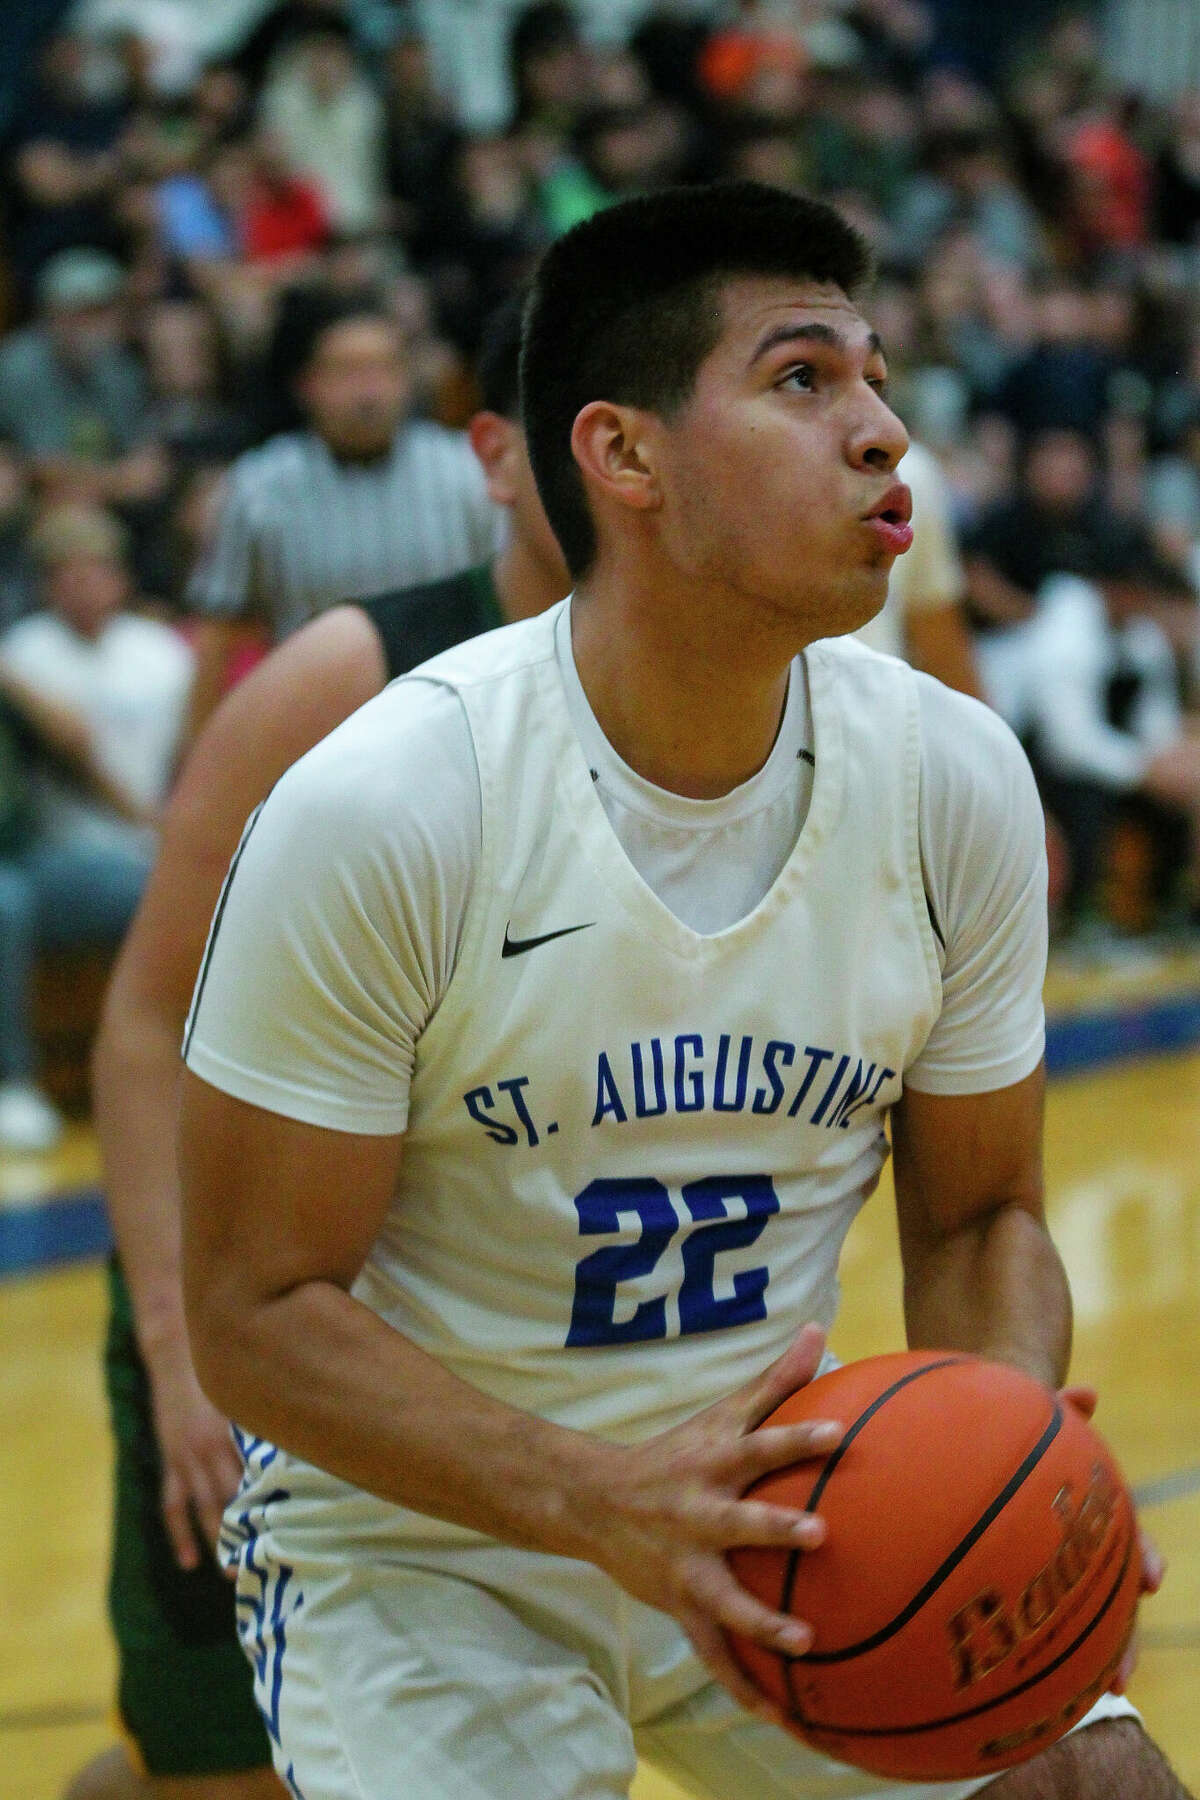 St. Augustine's Rafa Garcia scored 24 points in Tuesday's overtime win against Nixon.